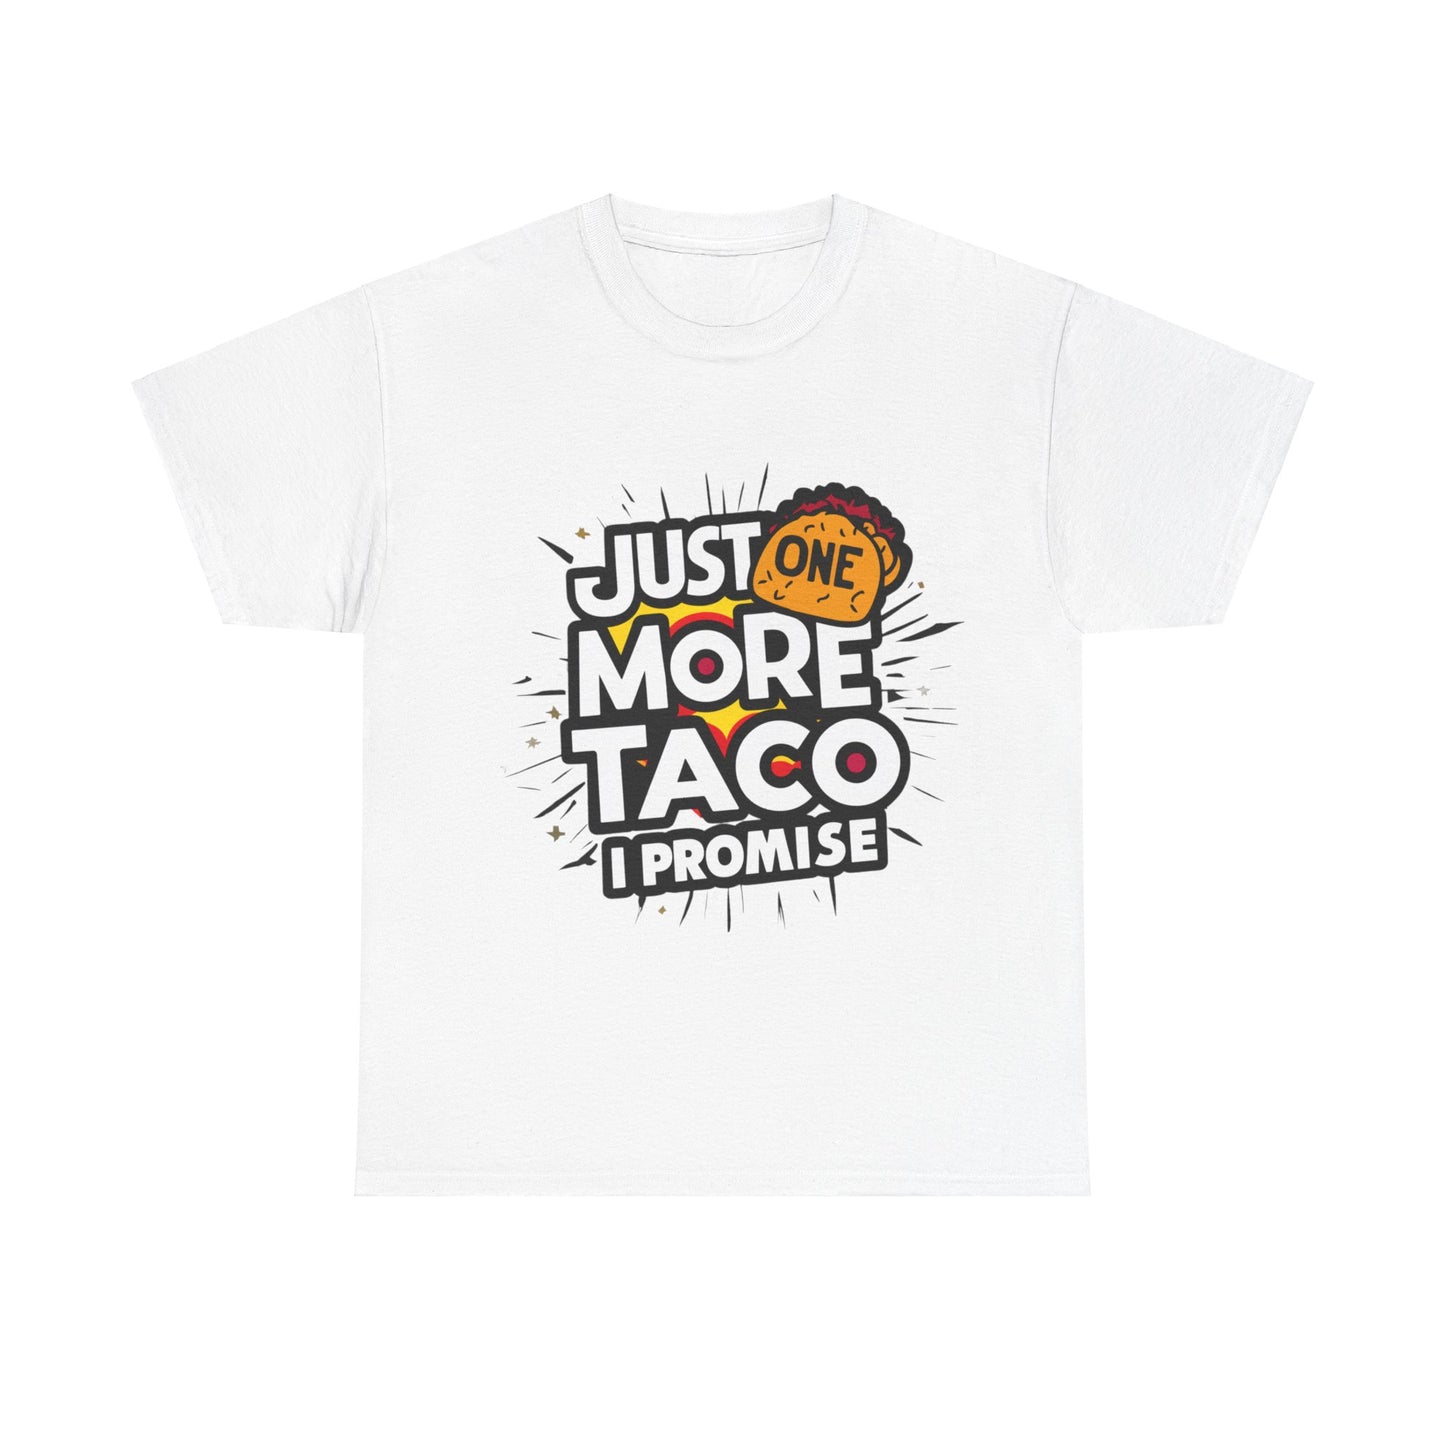 Copy of Just One More Taco I Promise Mexican Food Graphic Unisex Heavy Cotton Tee Cotton Funny Humorous Graphic Soft Premium Unisex Men Women White T-shirt Birthday Gift-10